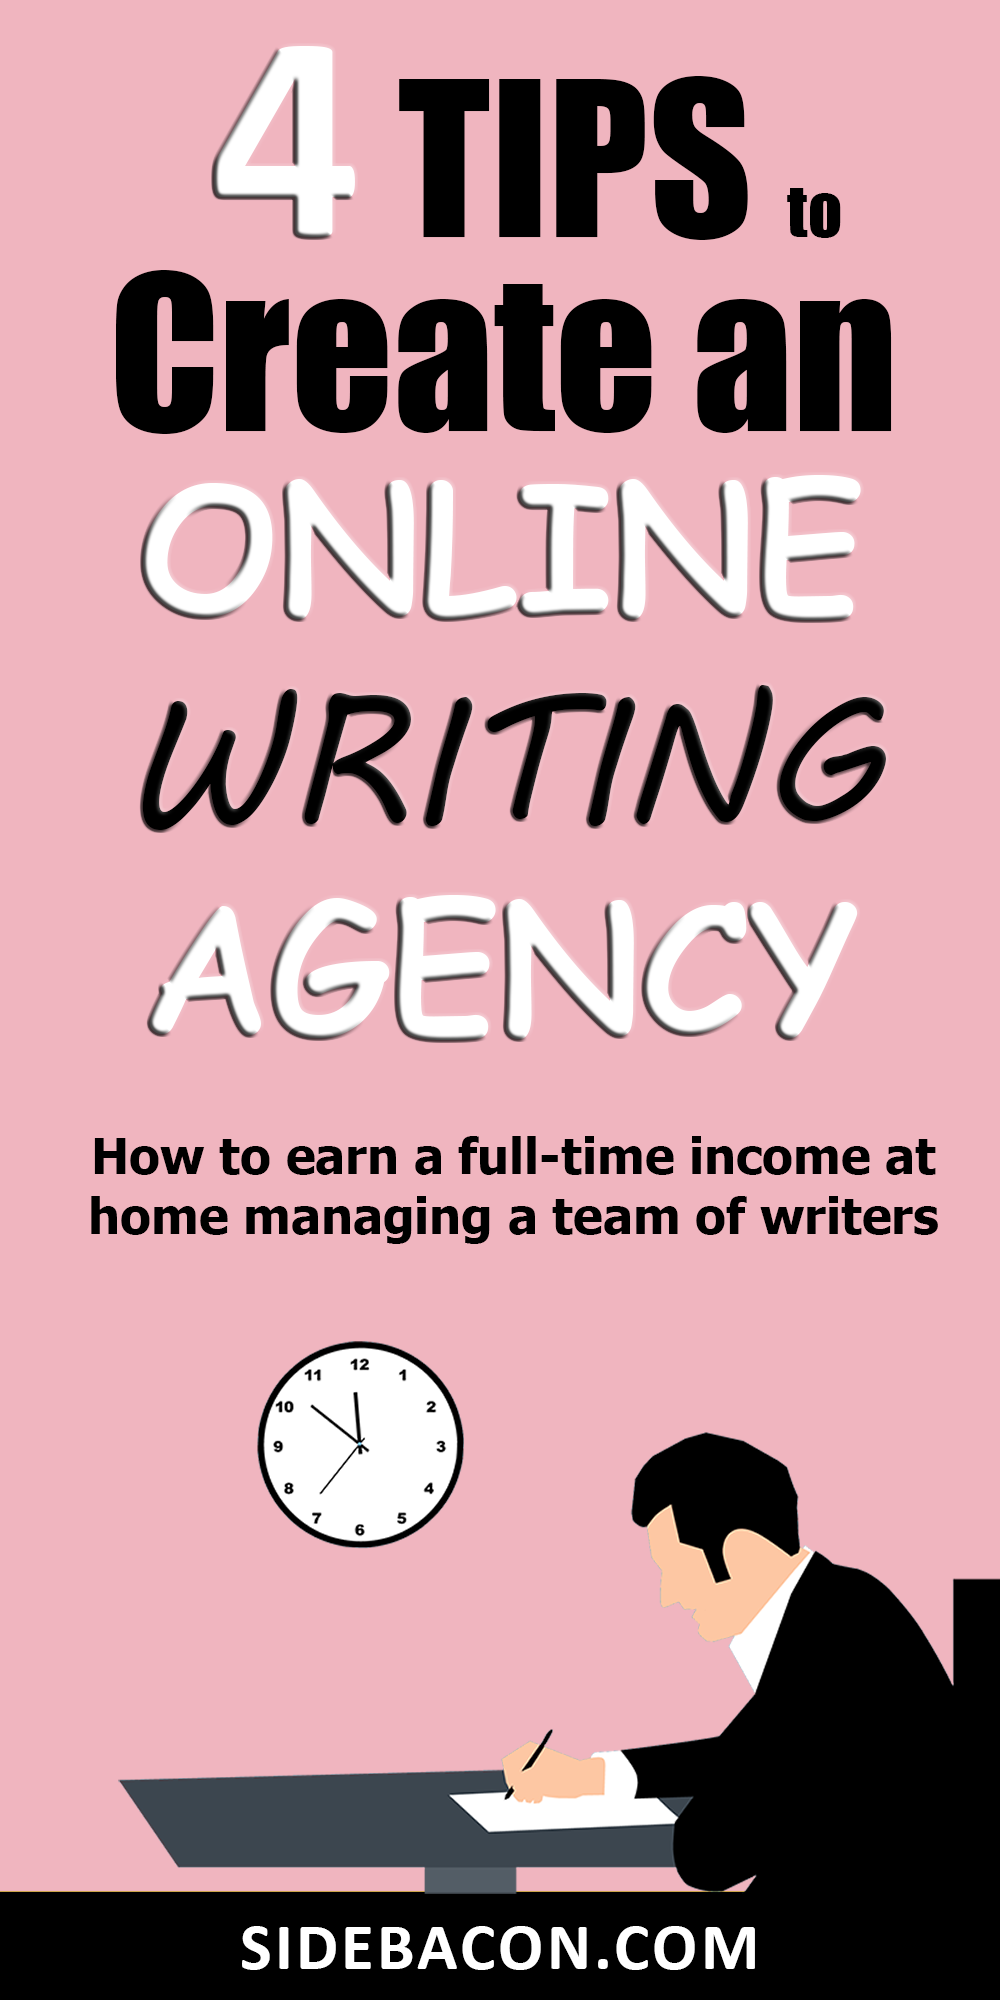 4 Tips to Create an Online Writing Agency - How to earn a full-time income at home managing a team of writers